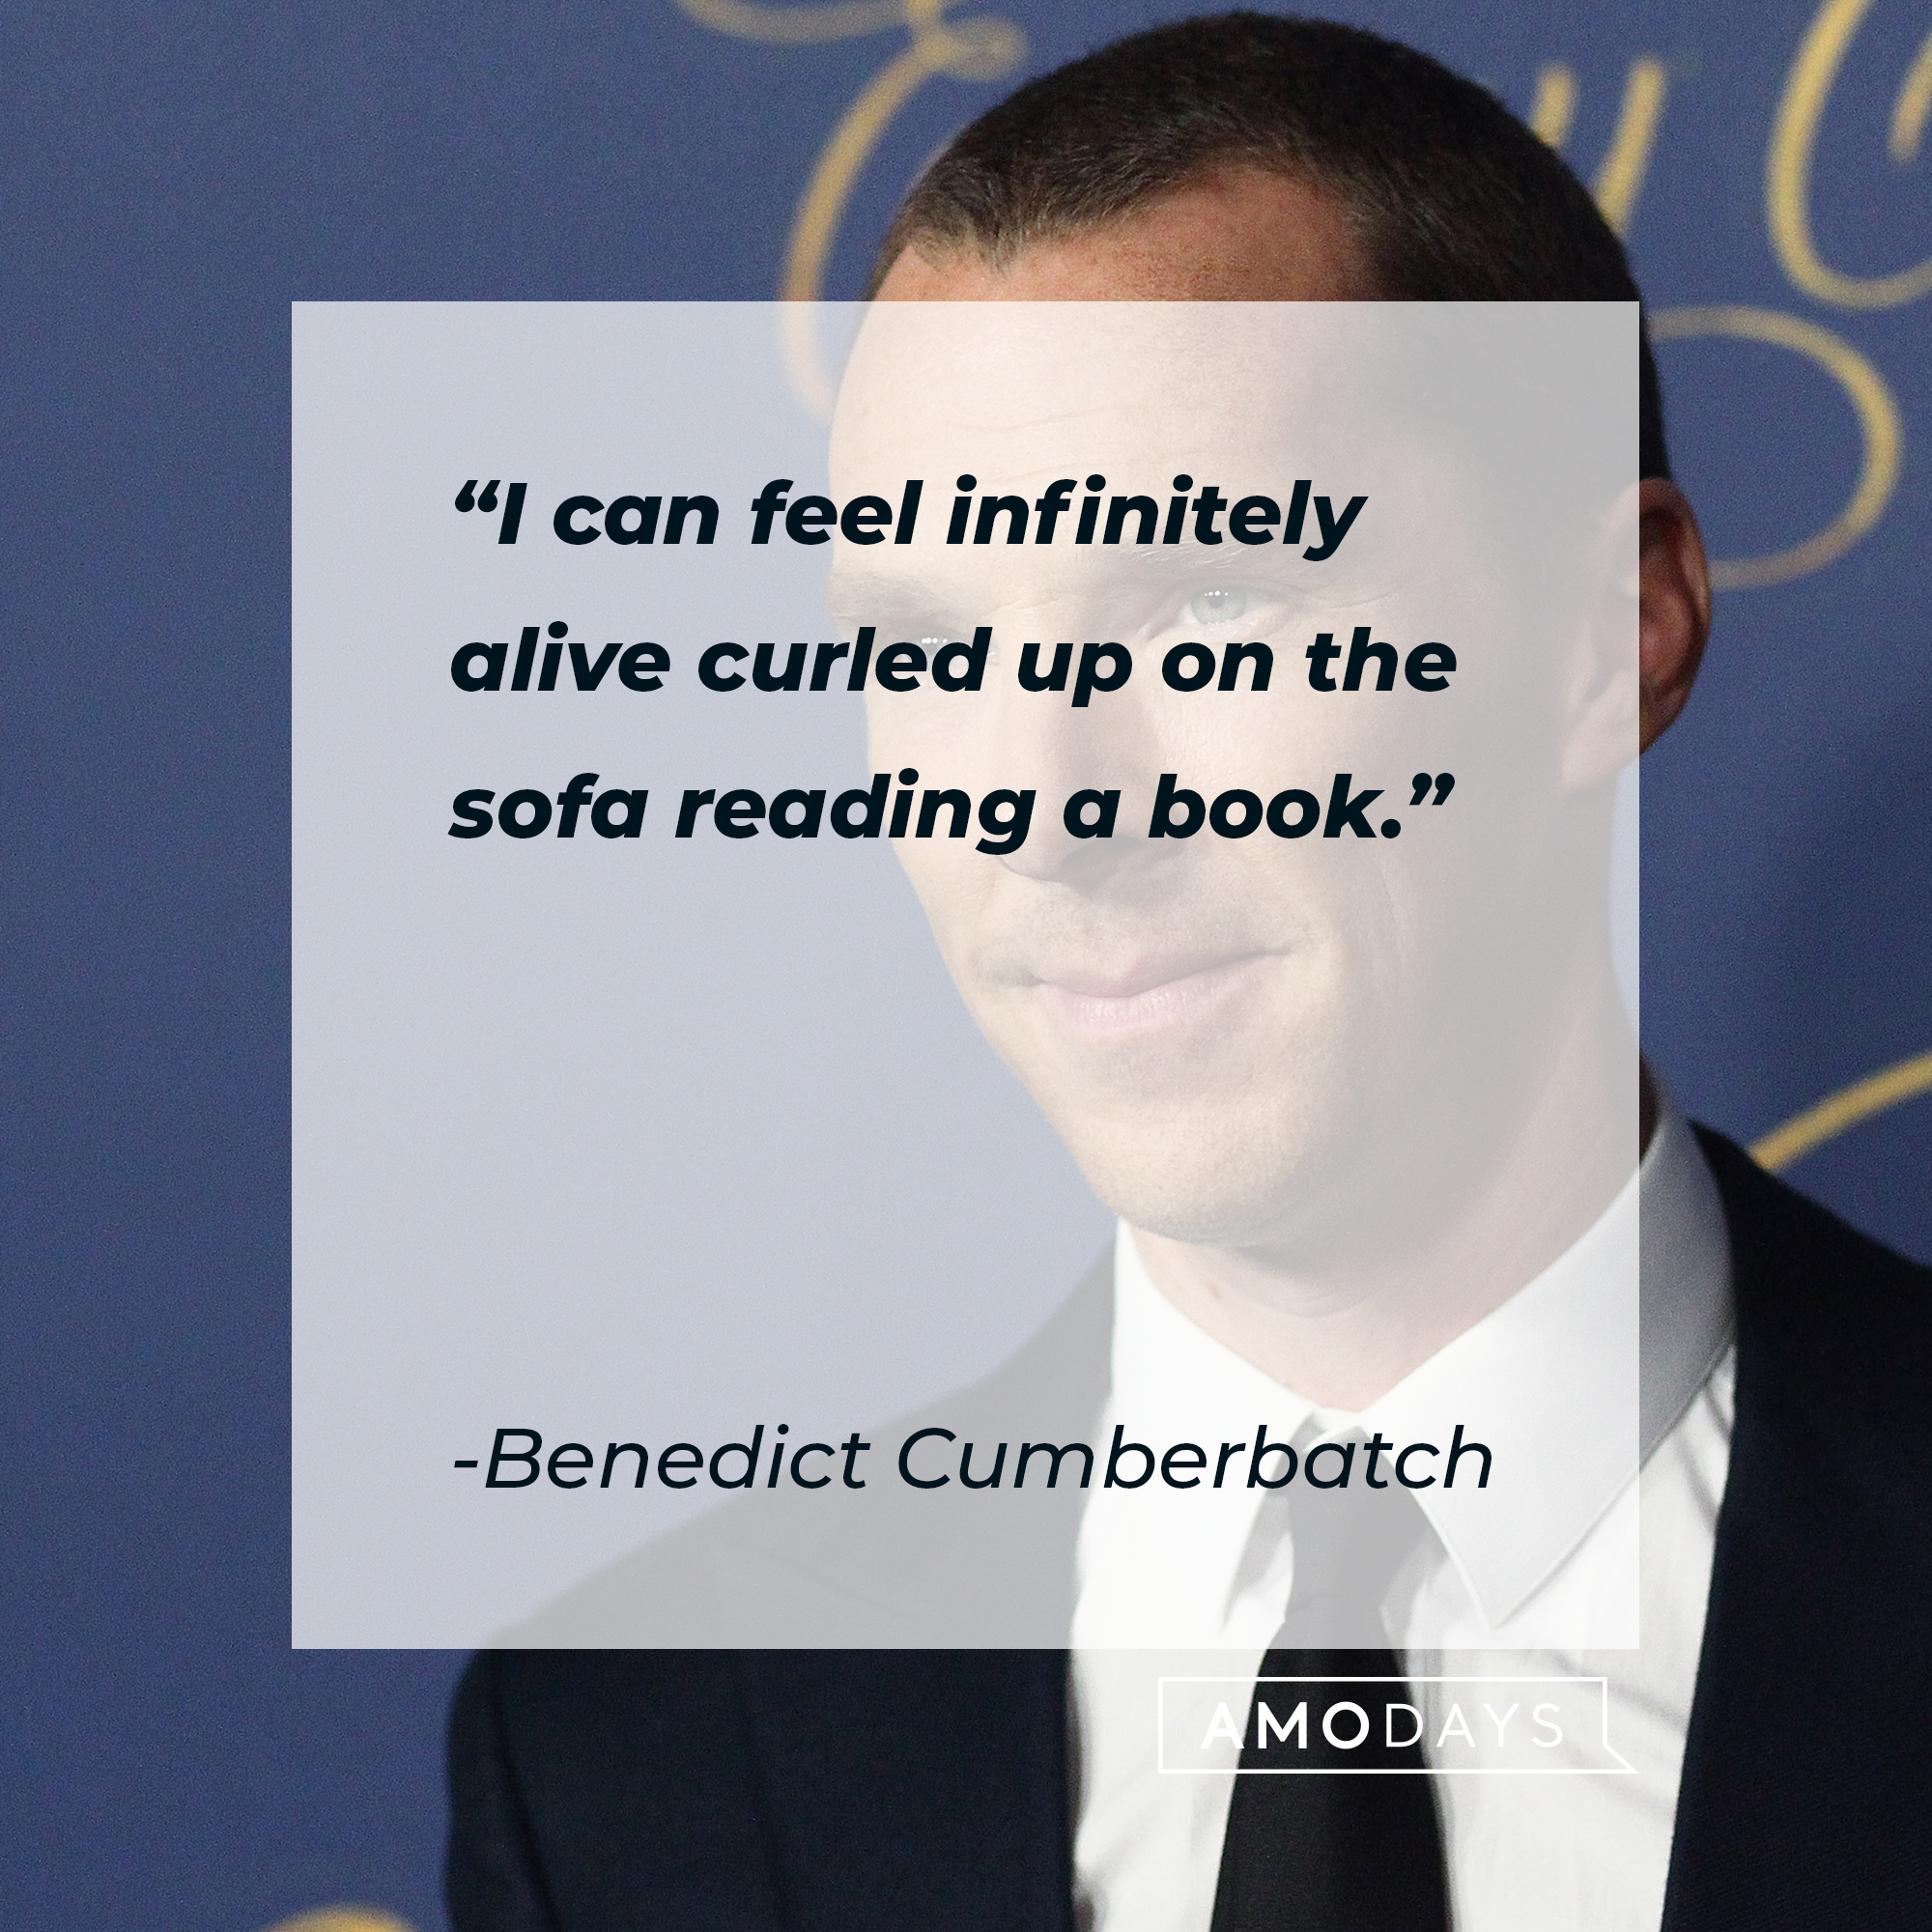 Benedict Cumberbatch, with his quote: Grandma June's quote: “I can feel infinitely alive curled up on the sofa reading a book.”  | Source: Getty Images